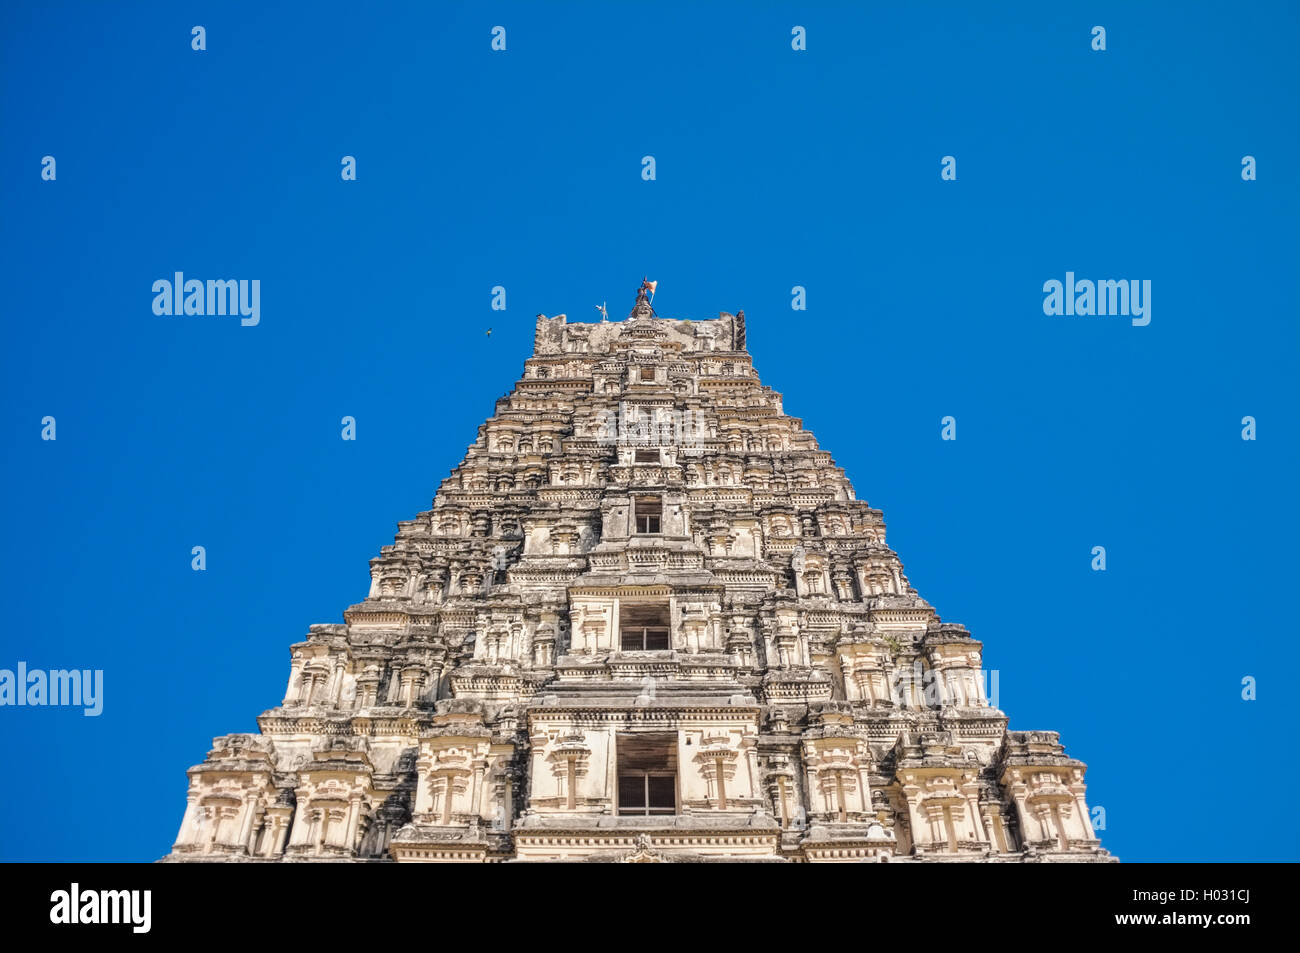 HAMPI, INDIA - 28 JANUARY 2015: Virupaksha Temple is located in Hampi in southern India. It is part of the Group of Monuments at Stock Photo